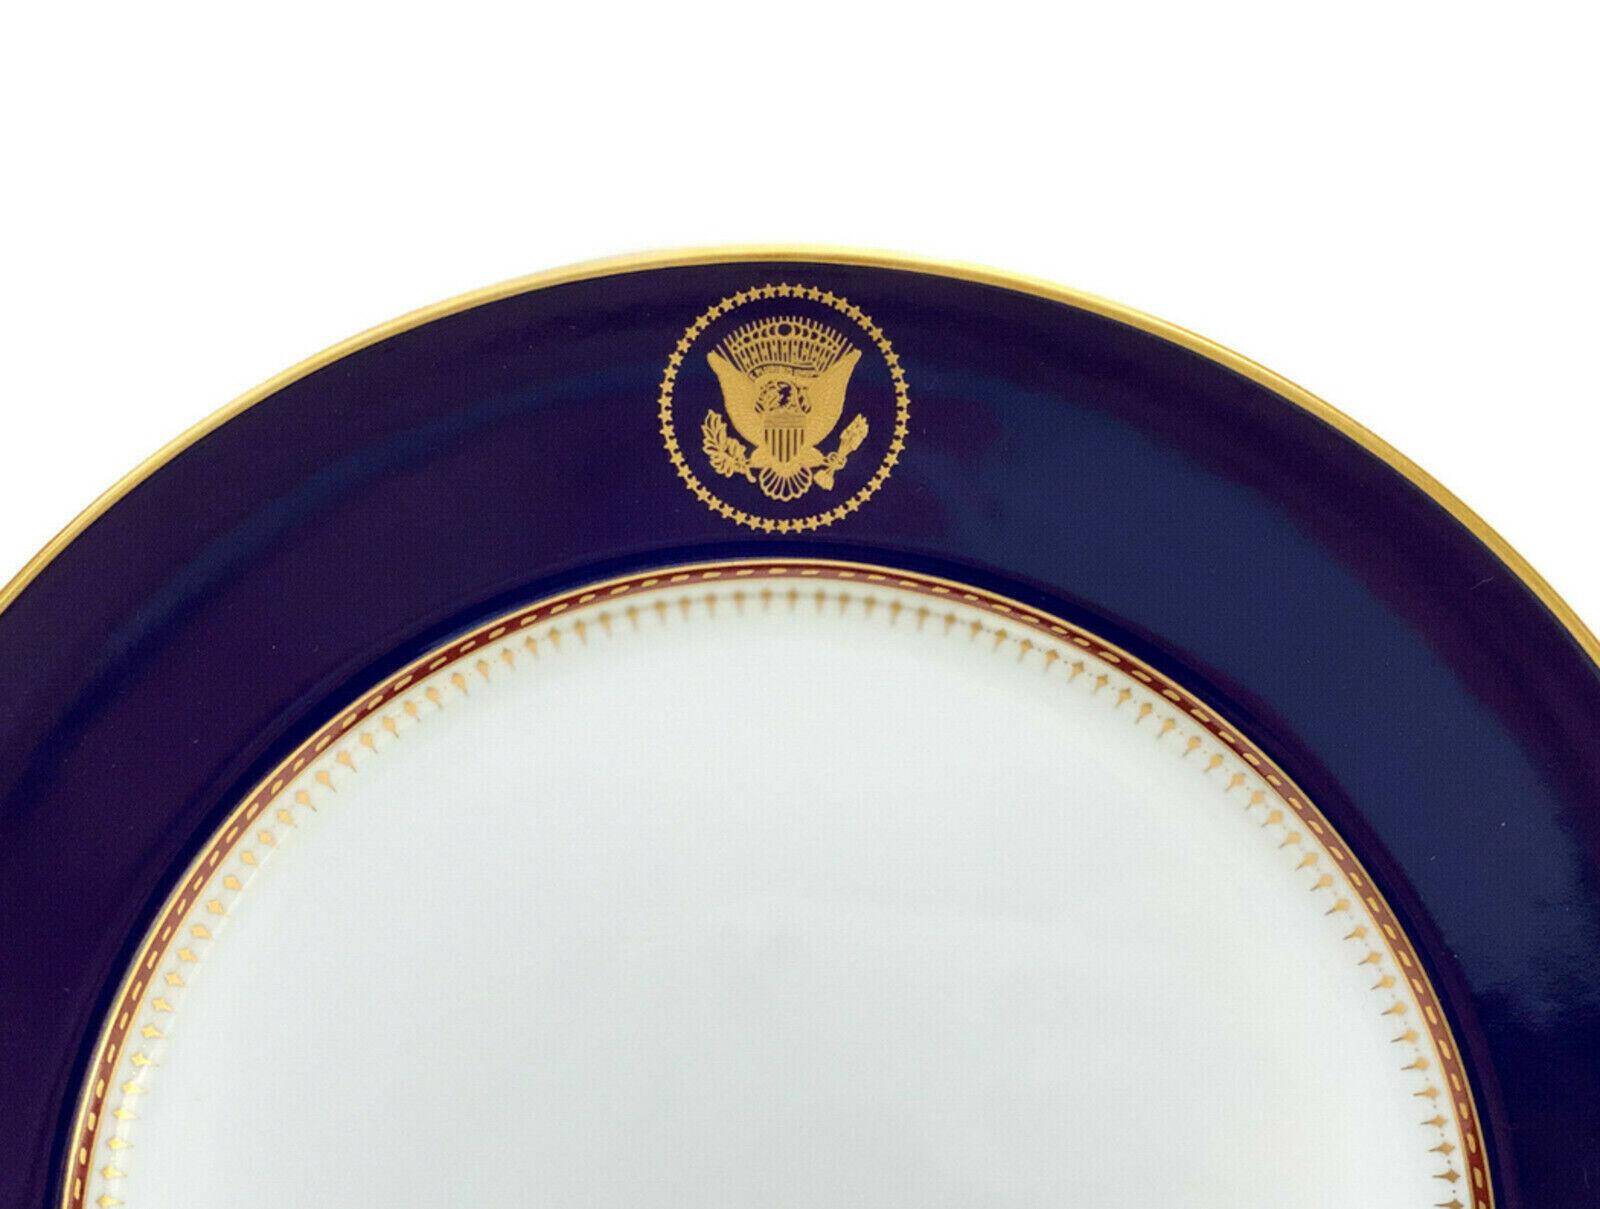 Fitz and Floyd Reagan White House Dinner Plate, 1983

A cobalt blue ground and gilt Great Seal of the United States to top central rims. Gilt accents to the edges and inner rim with a stitched, dotted, and geometrical pattern. Marked Fitz and